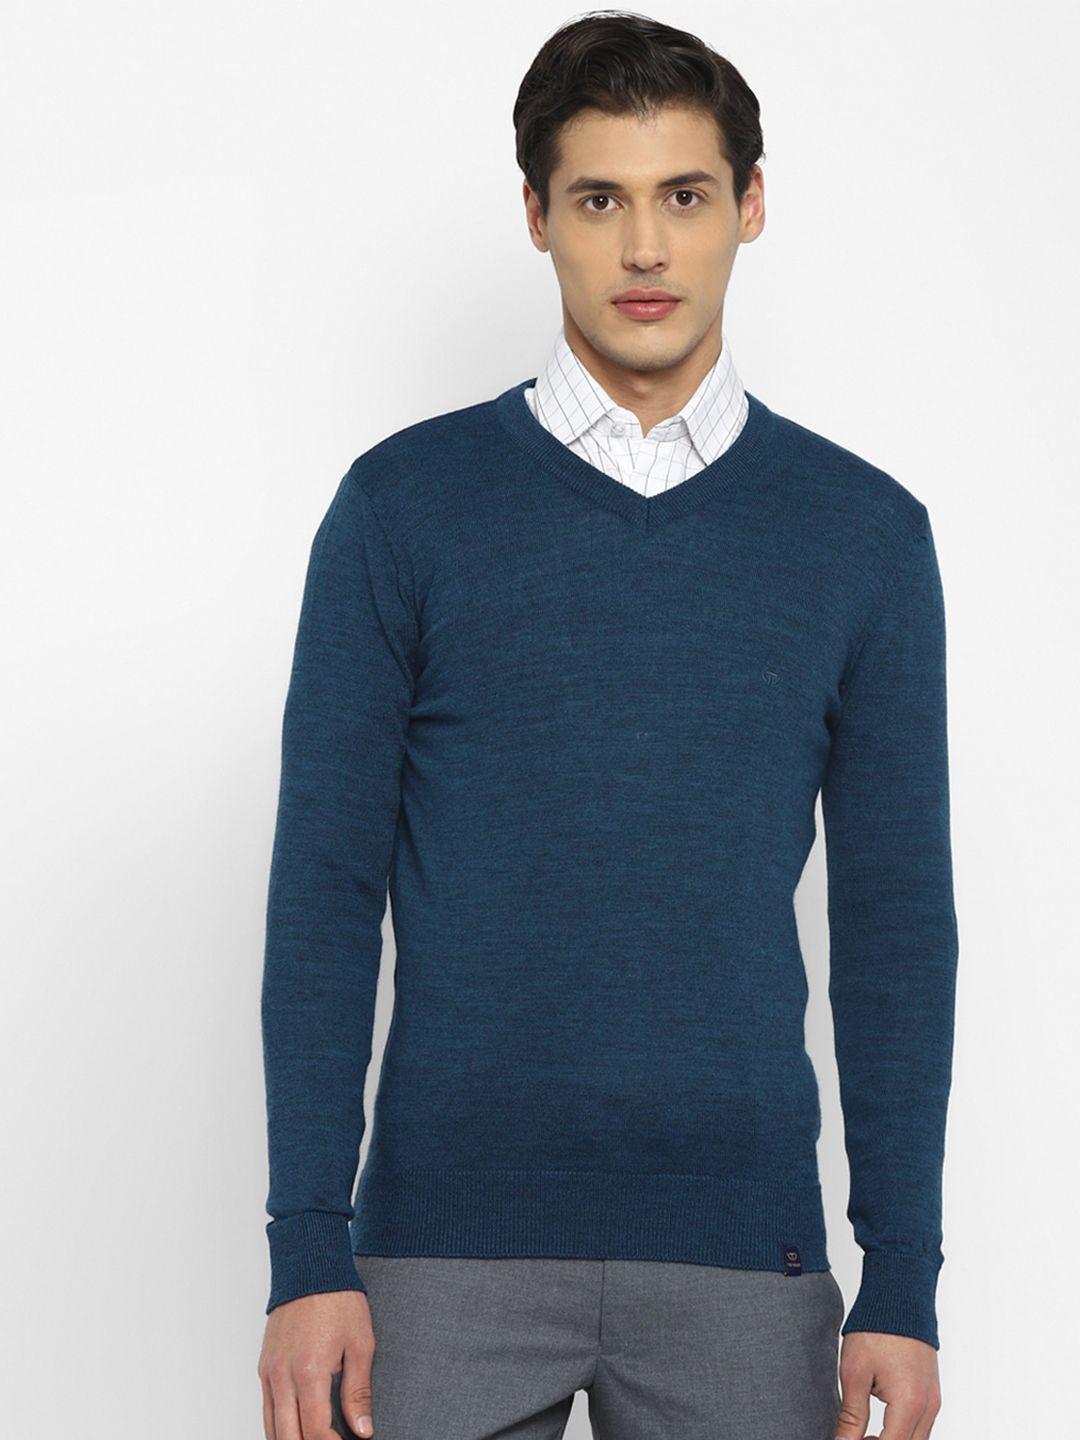 top brass v-neck wool pullover sweater